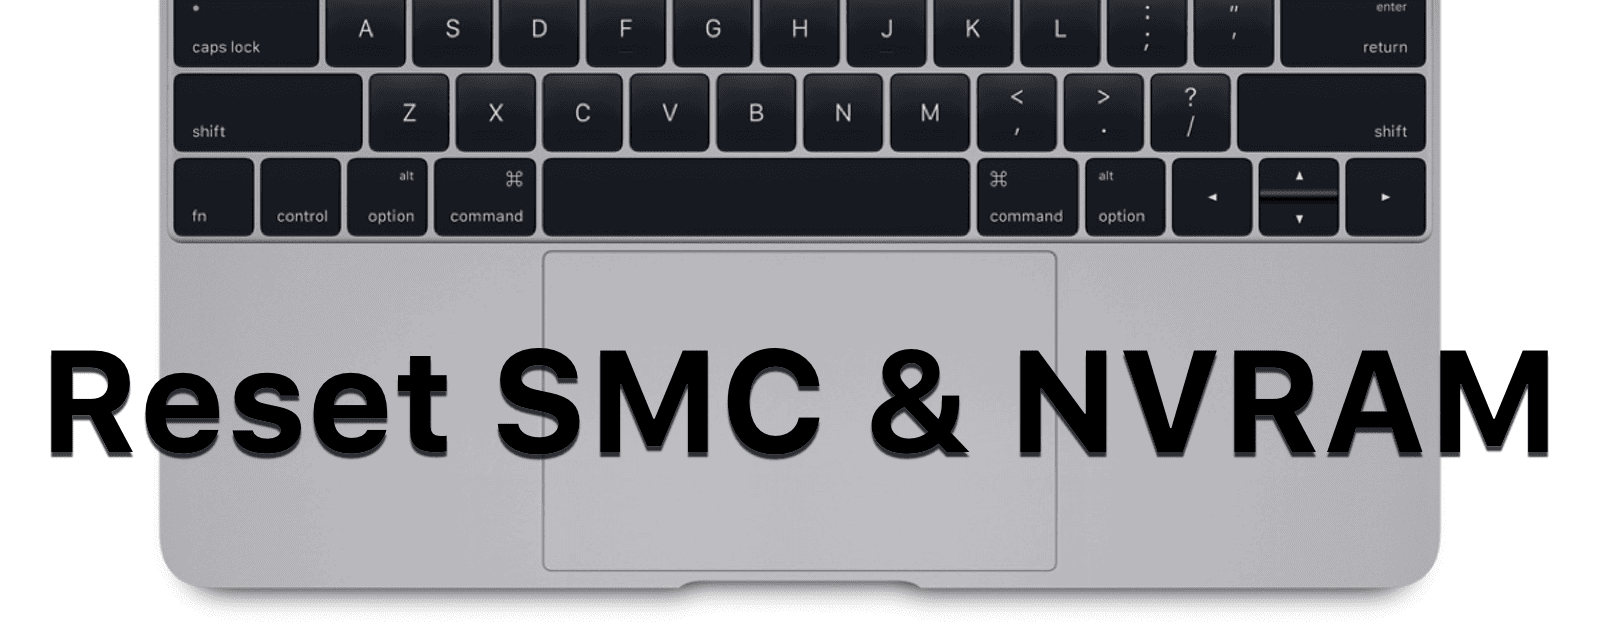 macOS: How to Reset Mac SMC and NVRAM, and Why You Would Need To